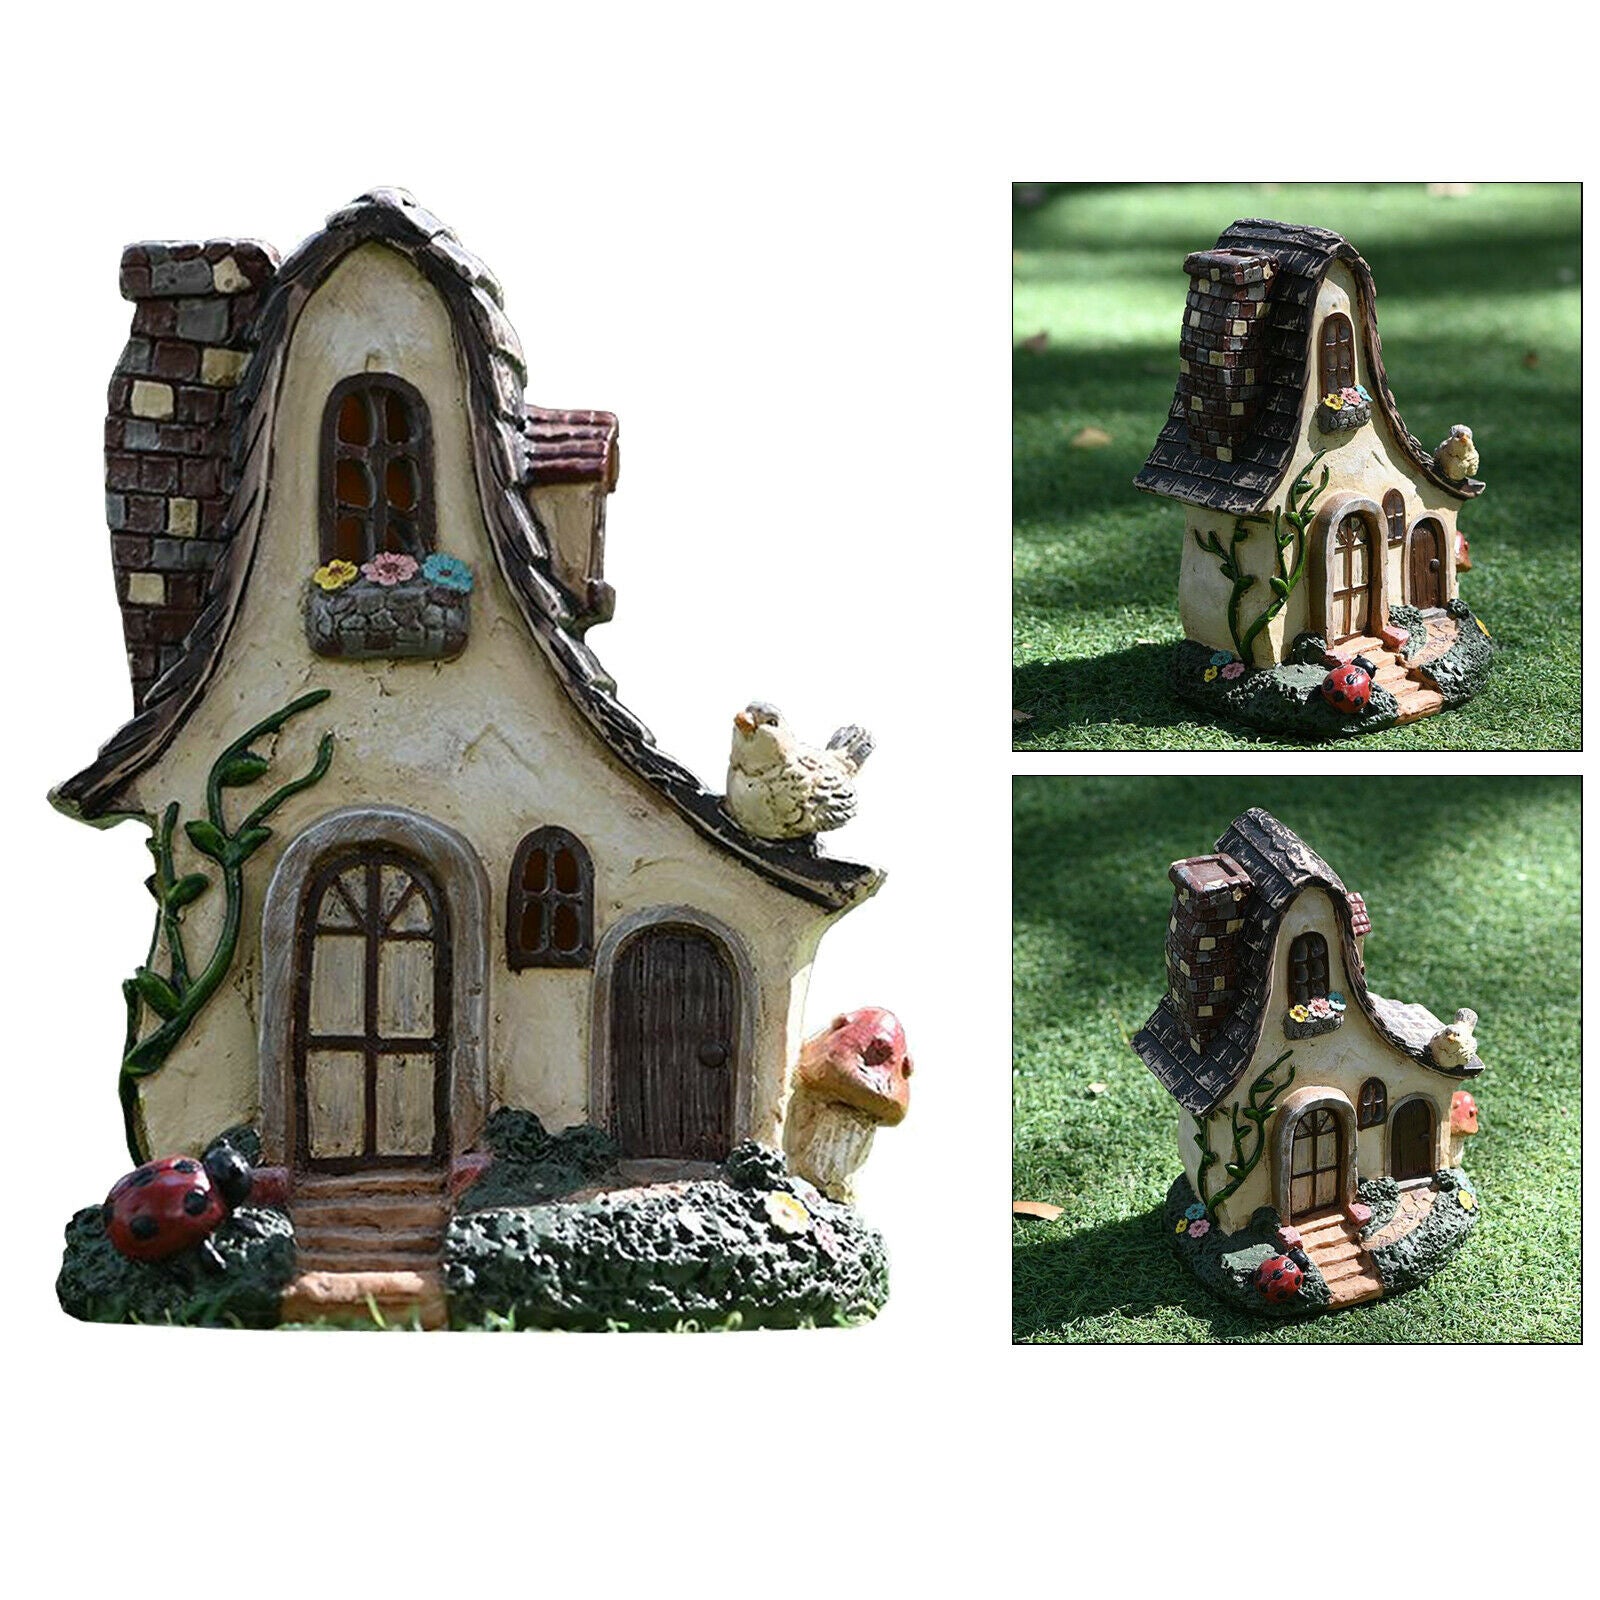 Fairy House Garden Sculpture Ornament for Balcony Flower Bed Lawn Gift